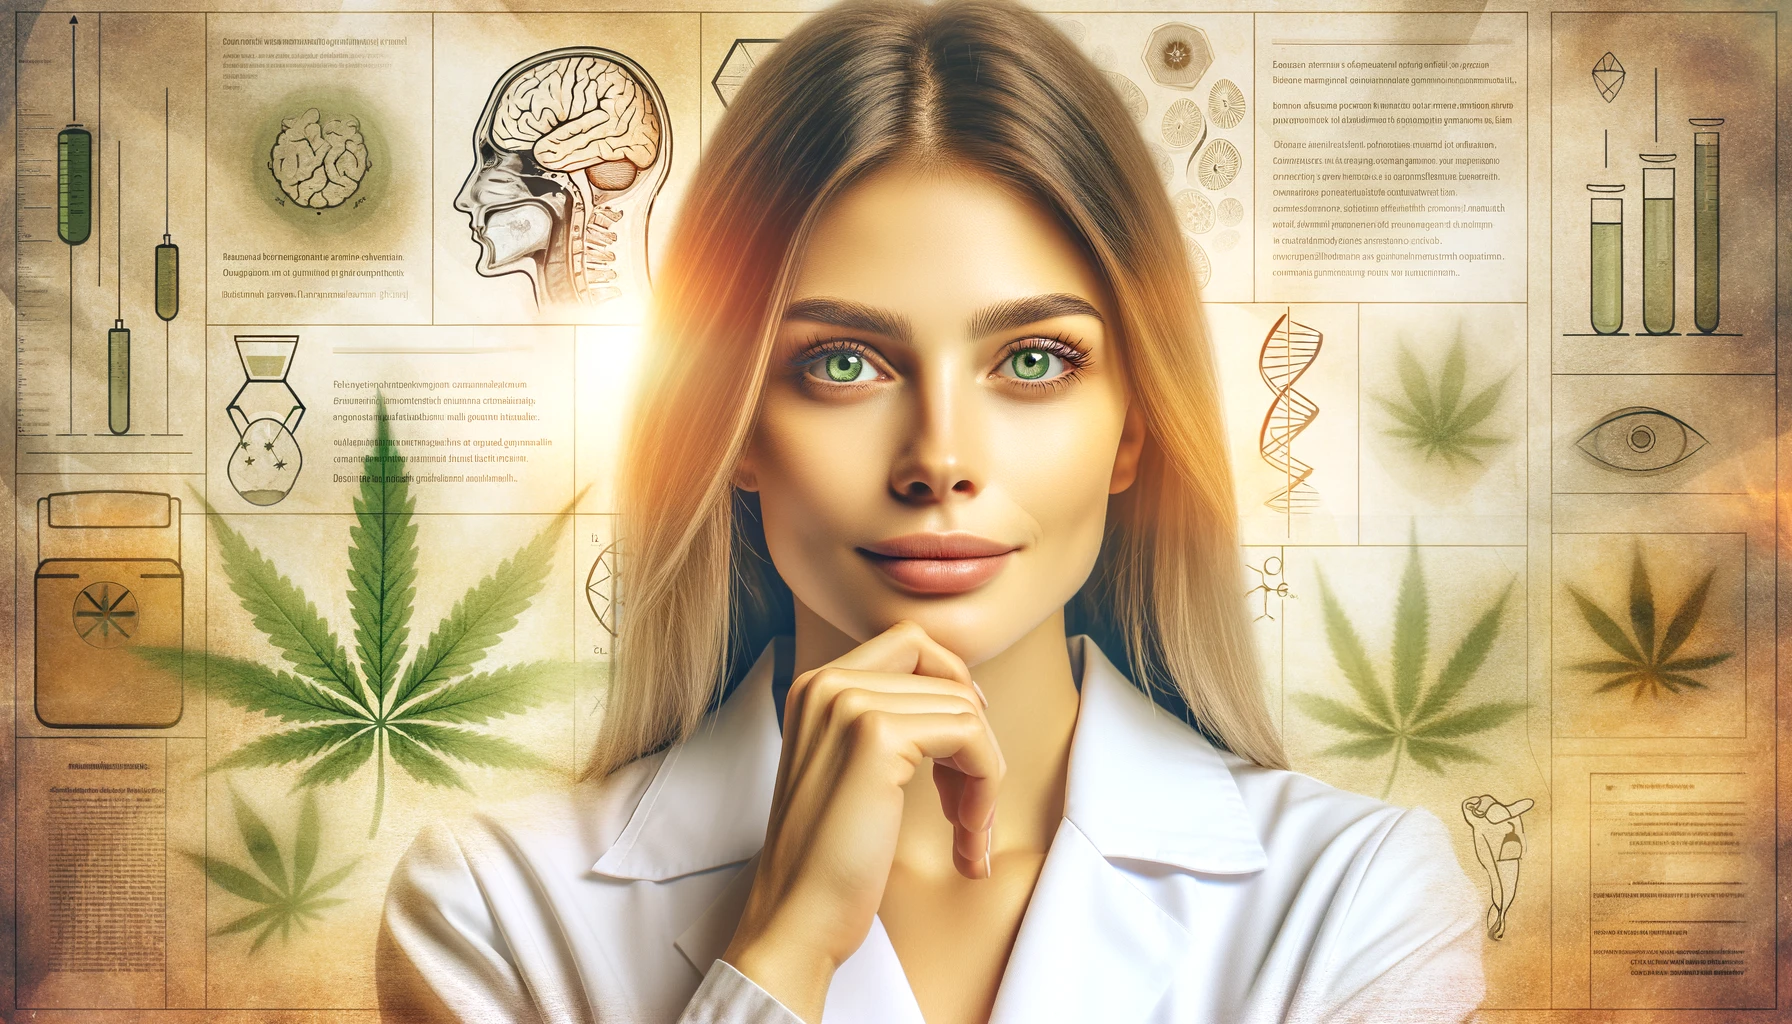 Doctor discussing cannabis rescheduling benefits